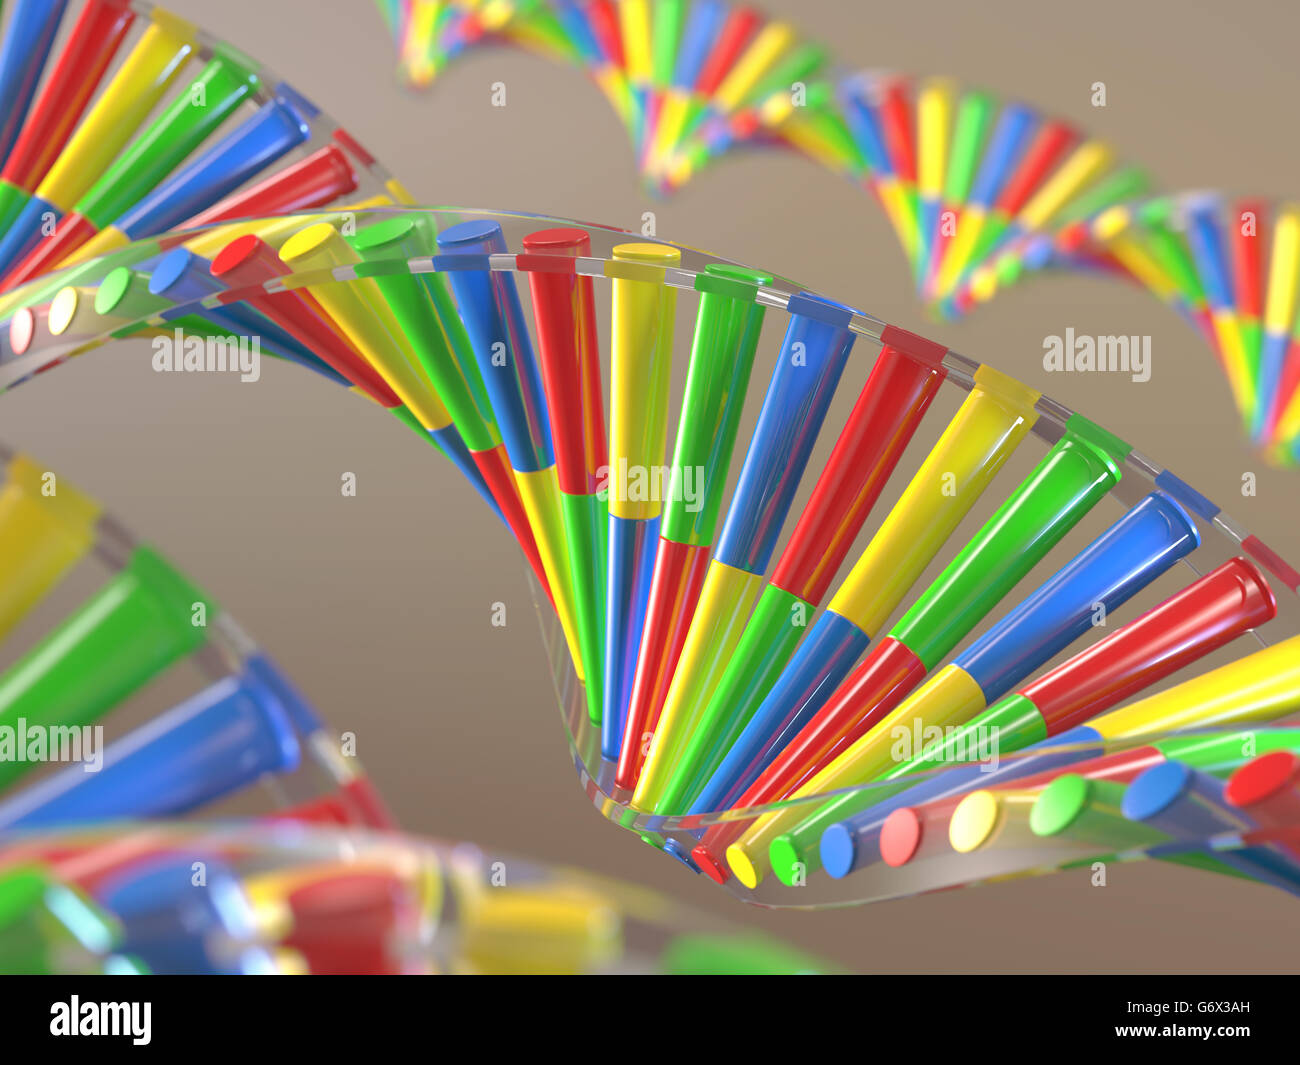 3D illustration, colorful dna, concept of genetic engineering or genetic modification. Stock Photo